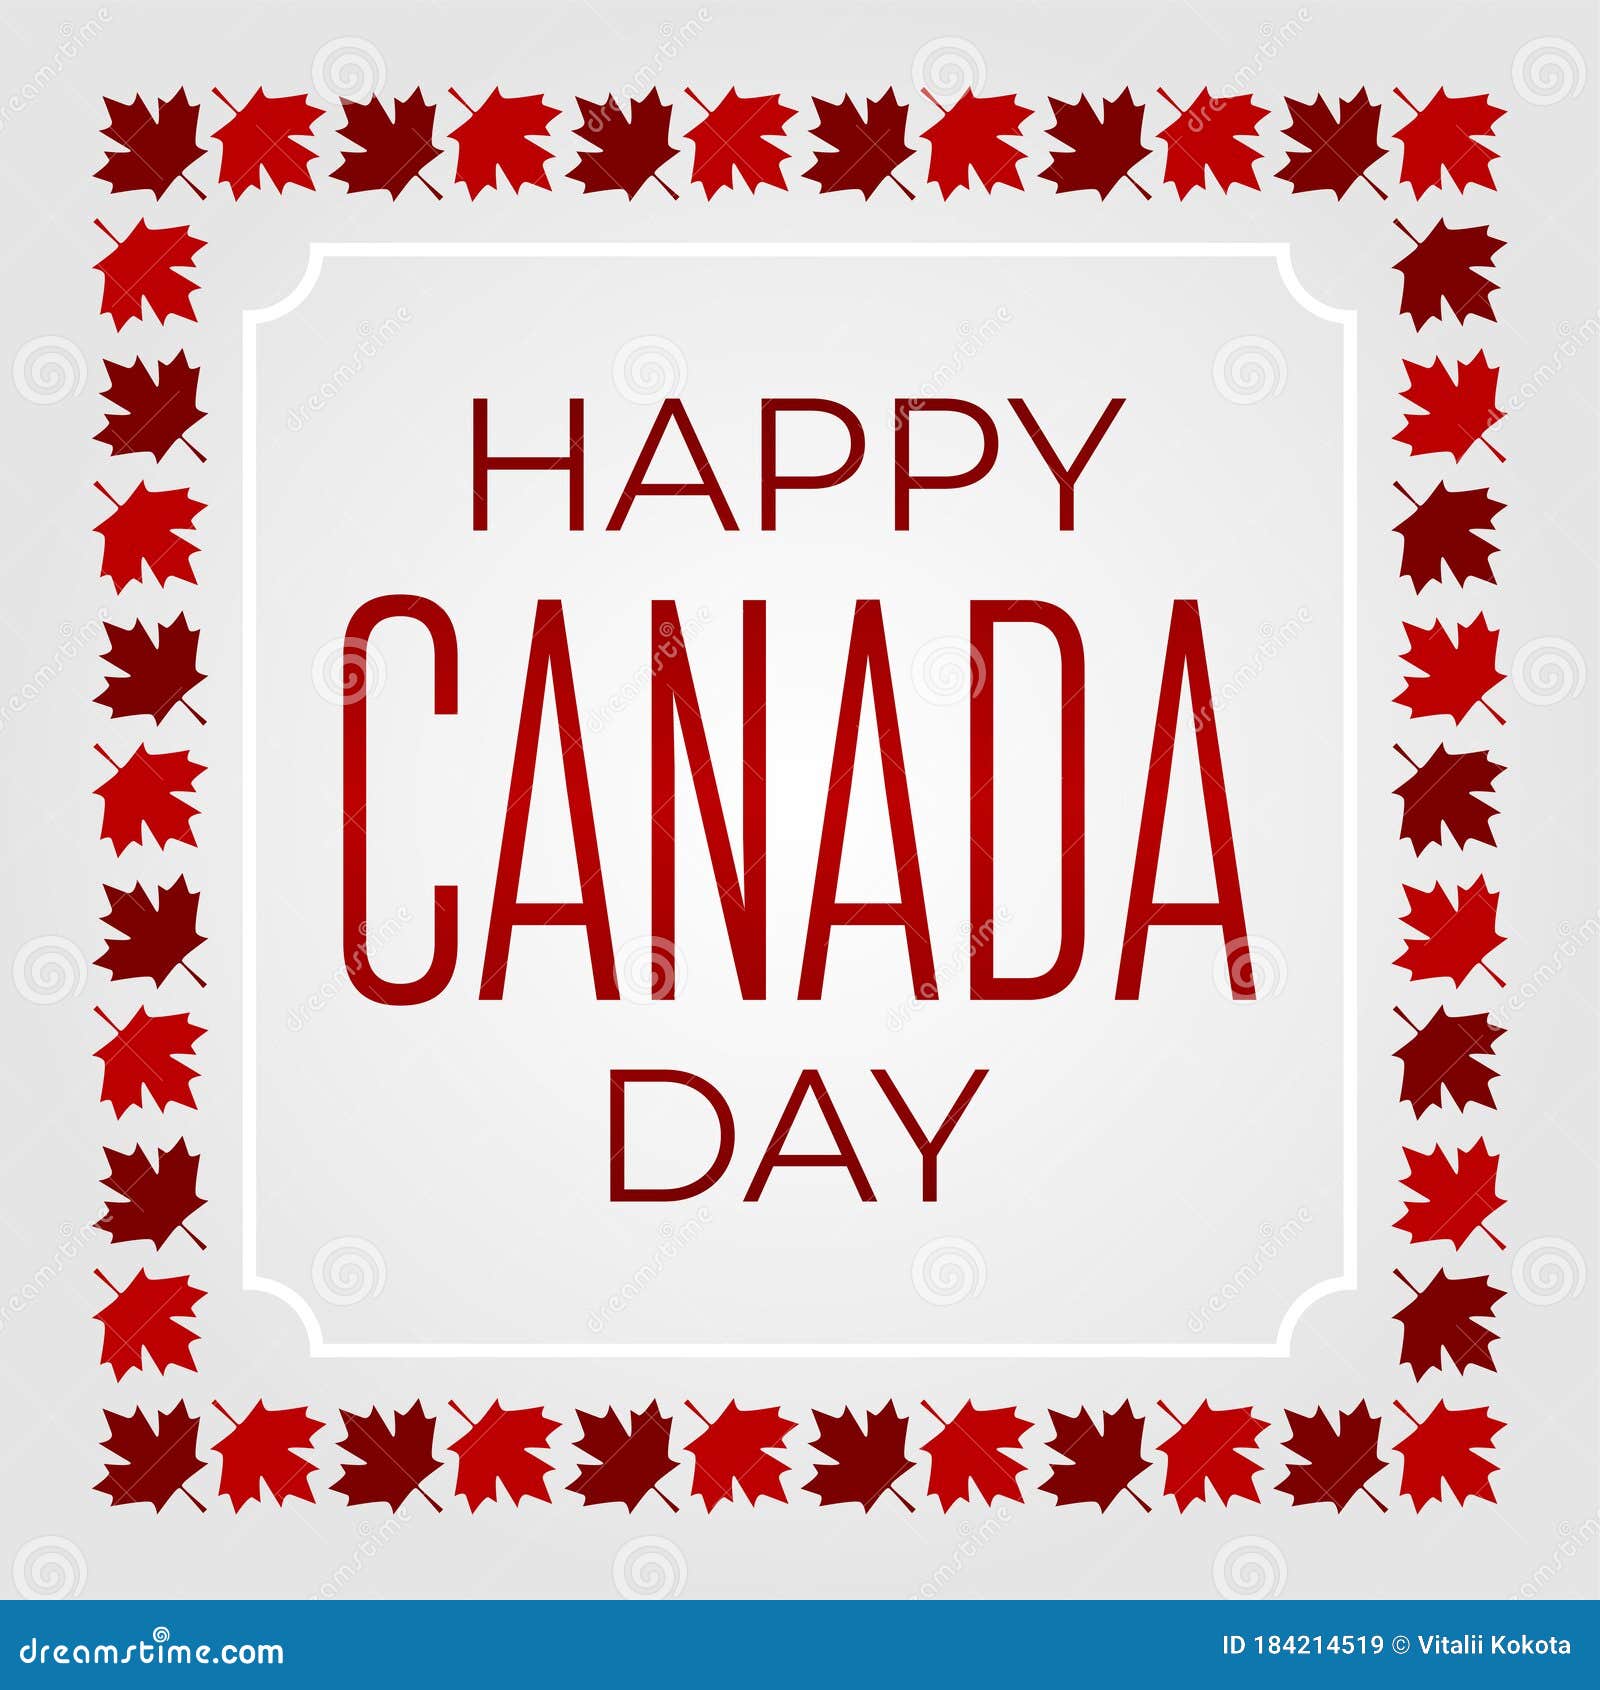 Celebrate The National Day Of Canada Red Canadian Maple Leaves With